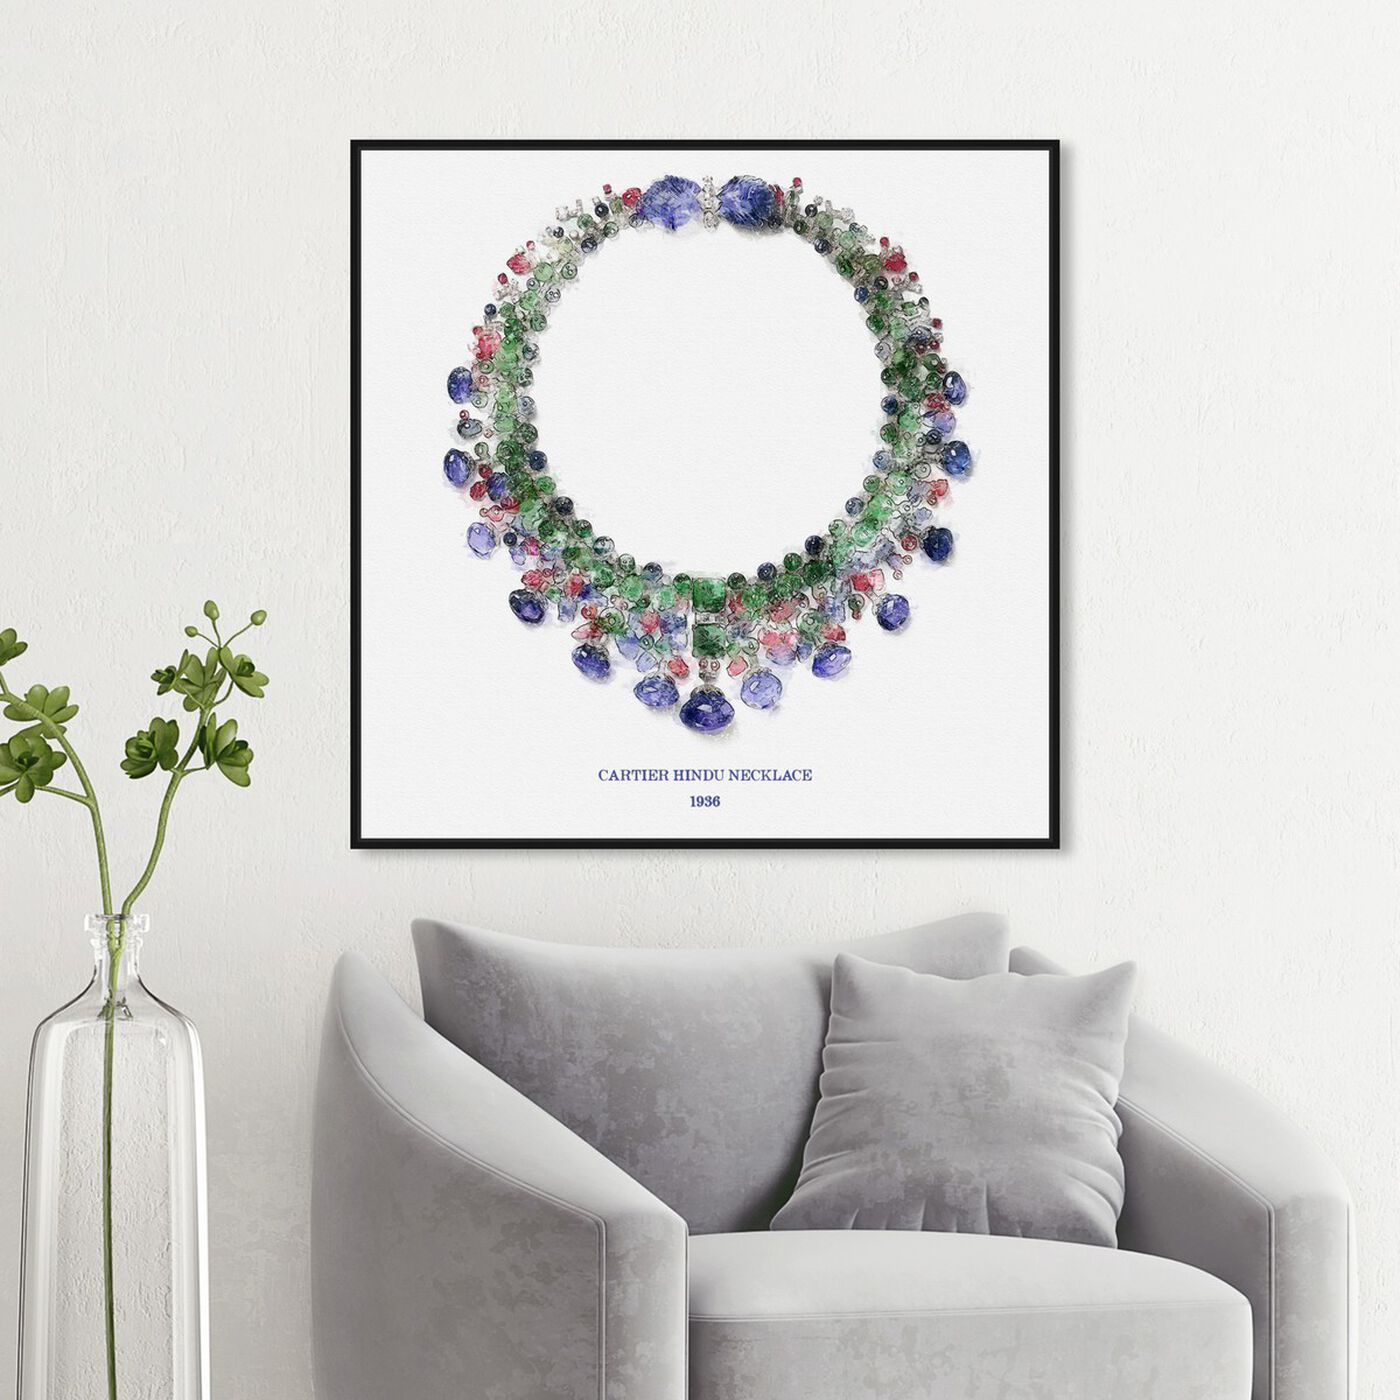 Hanging view of Hindu Necklace 1936 featuring floral and botanical and florals art.